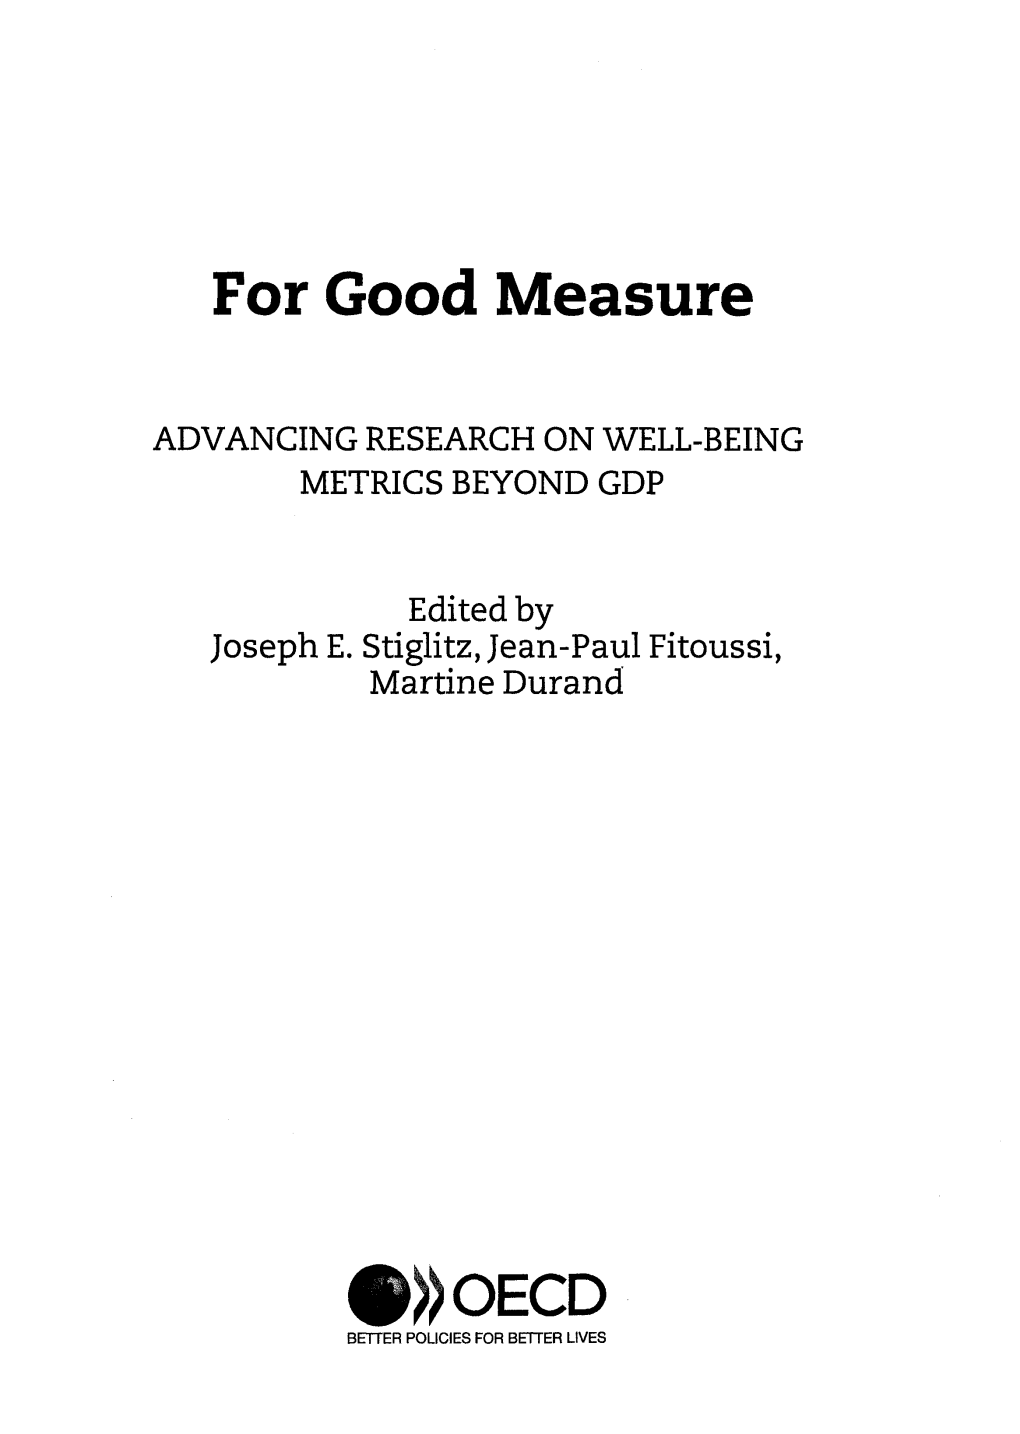 For Good Measure ADVANCING RESEARCH on WELL-BEING